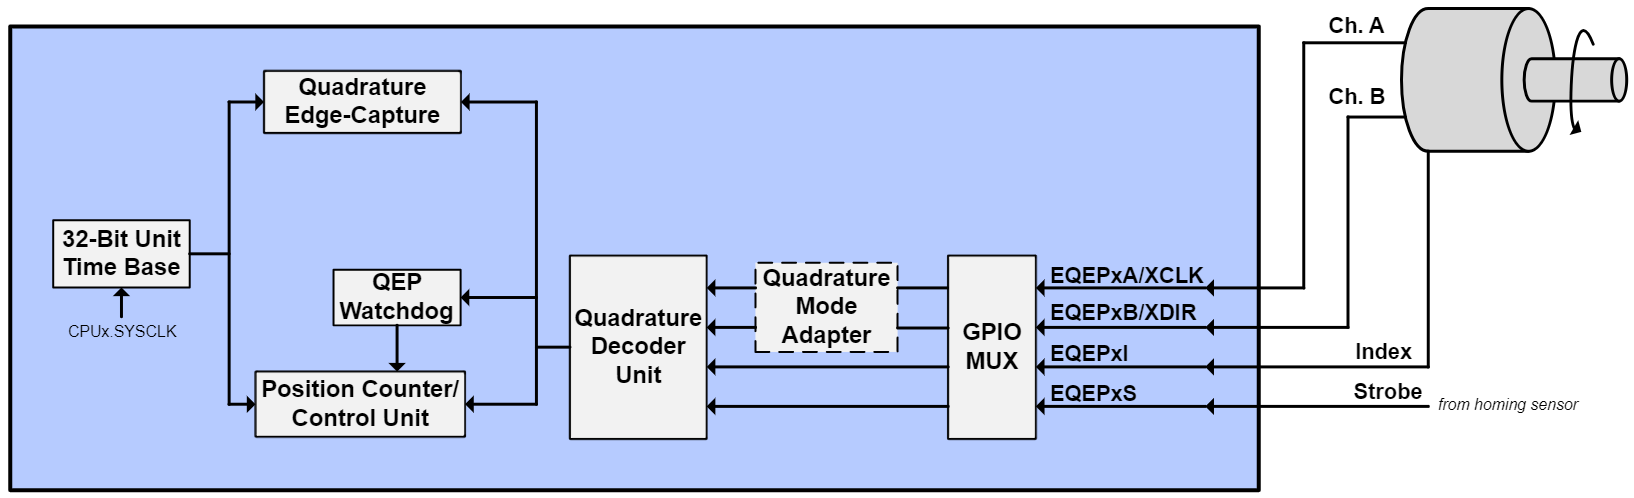 EQEP Module Connections